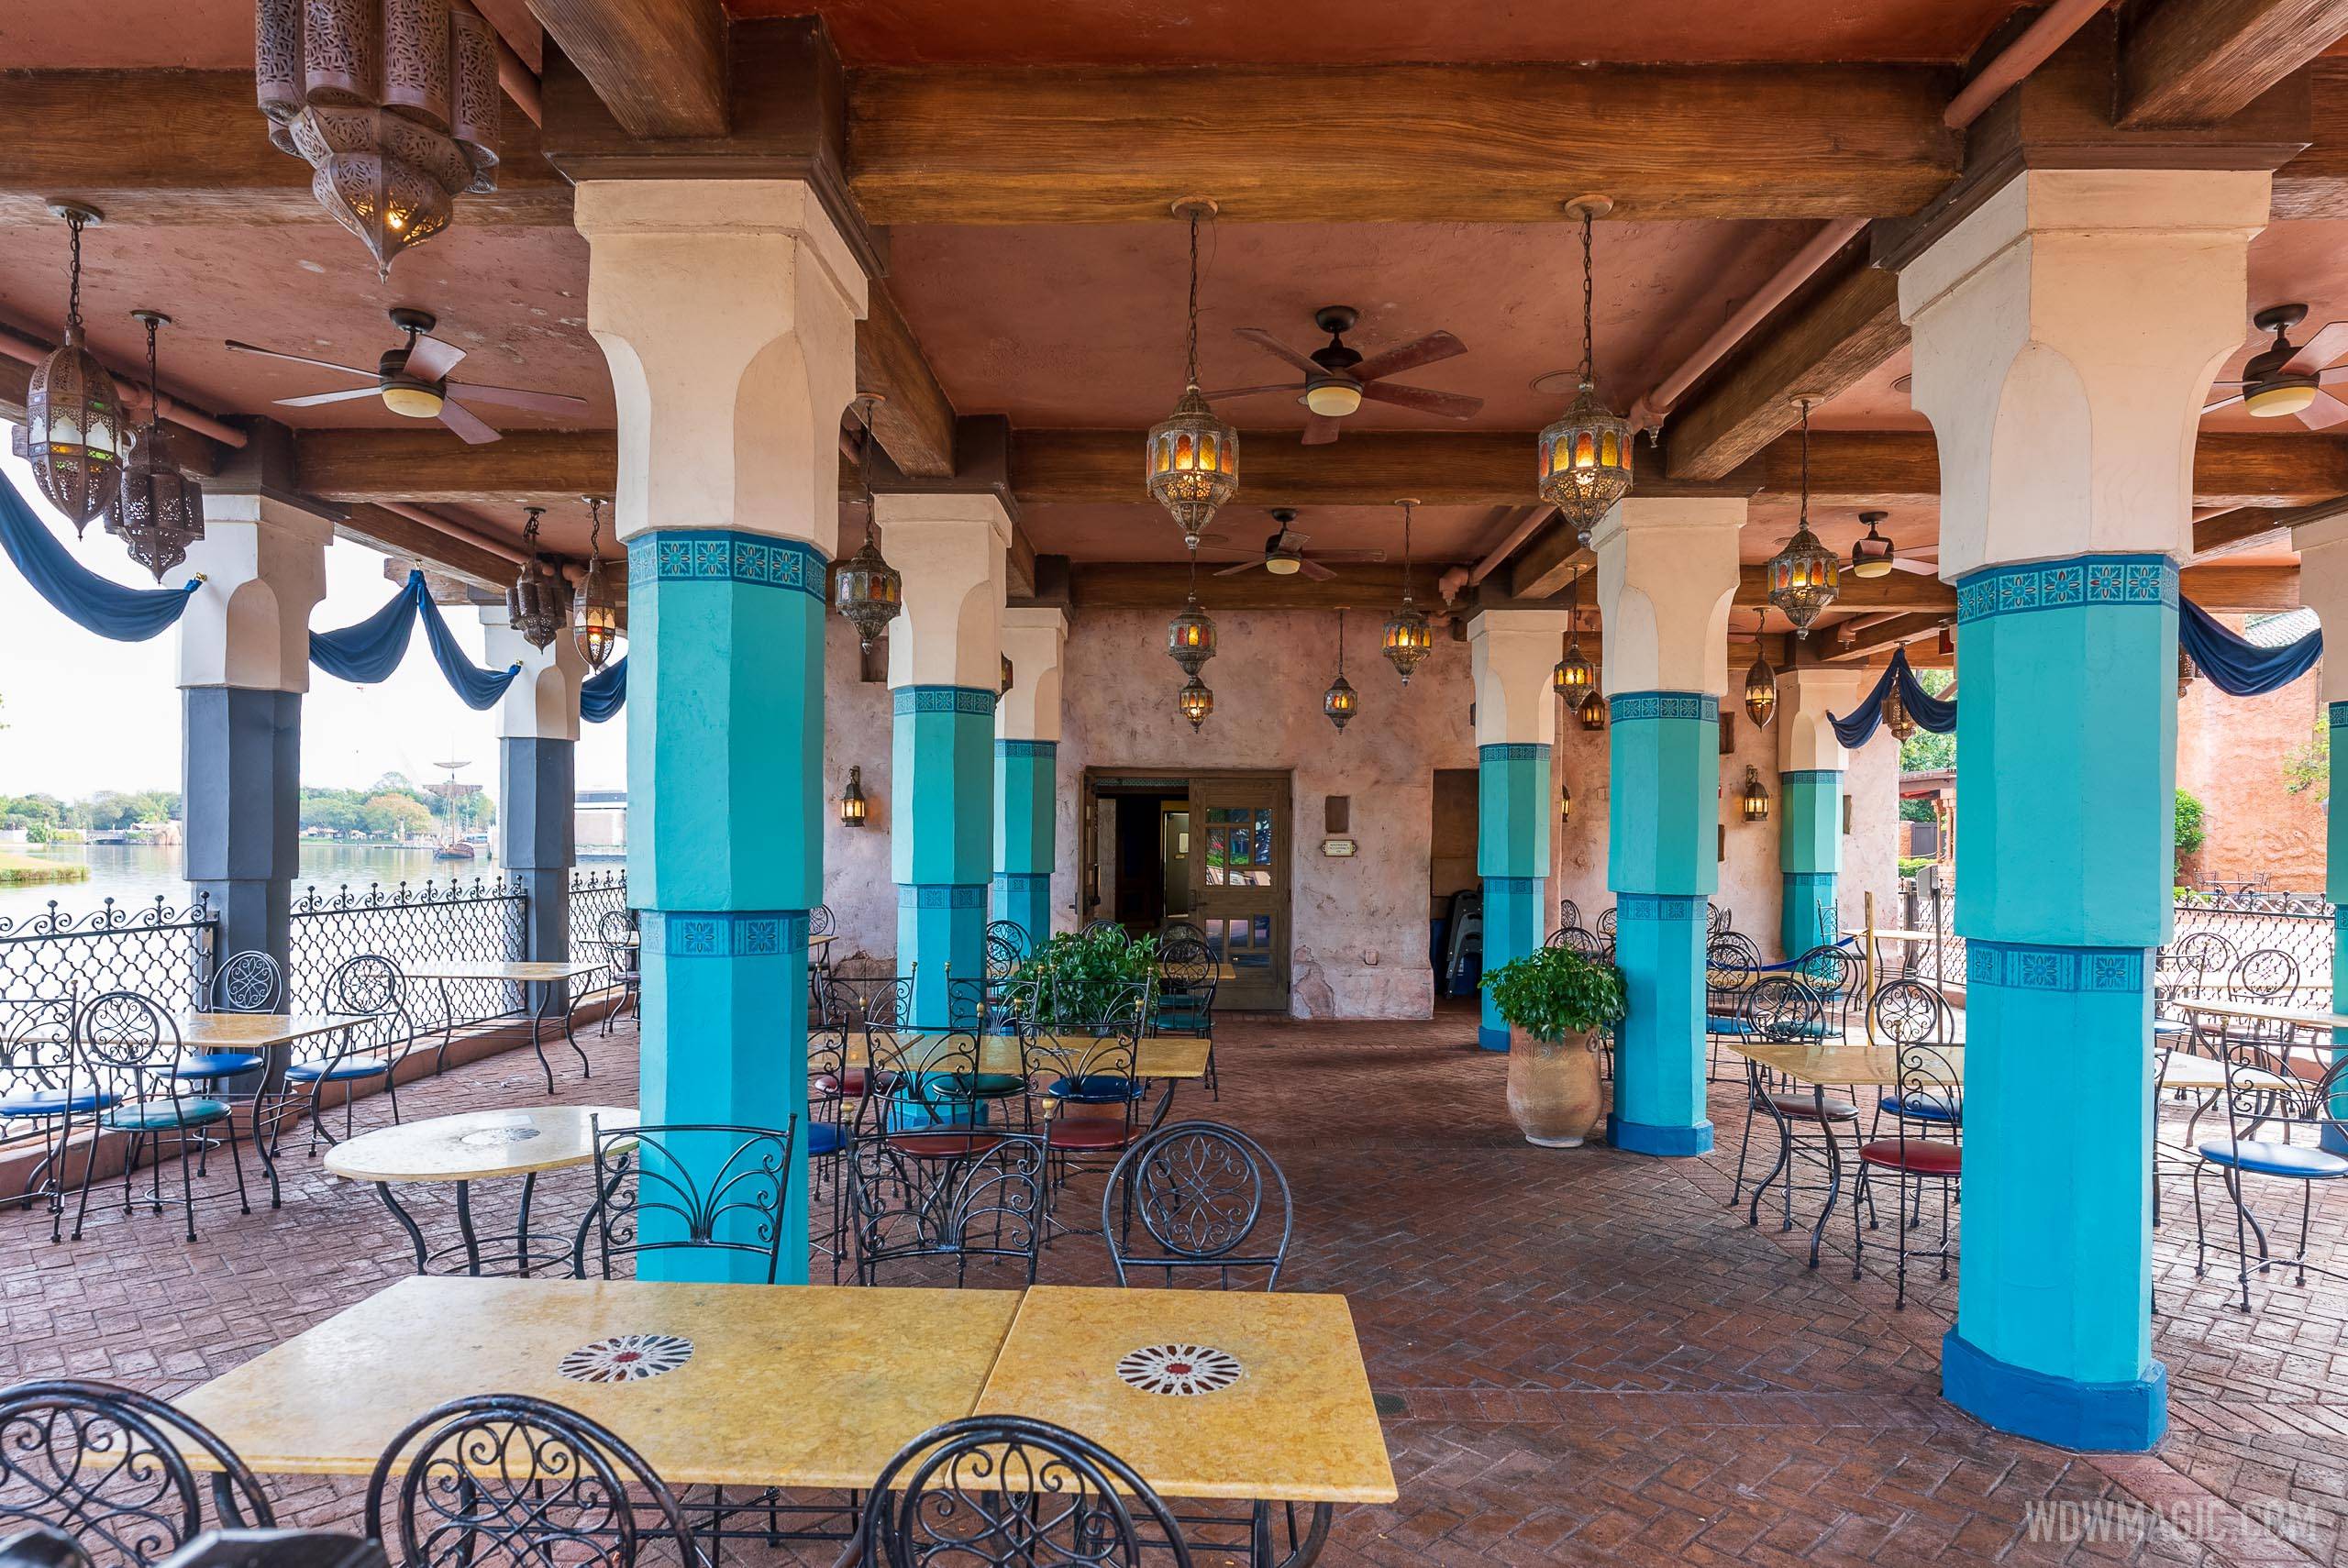 New waterside 'Spice Road Table' dining coming to Epcot's Morocco Pavilion